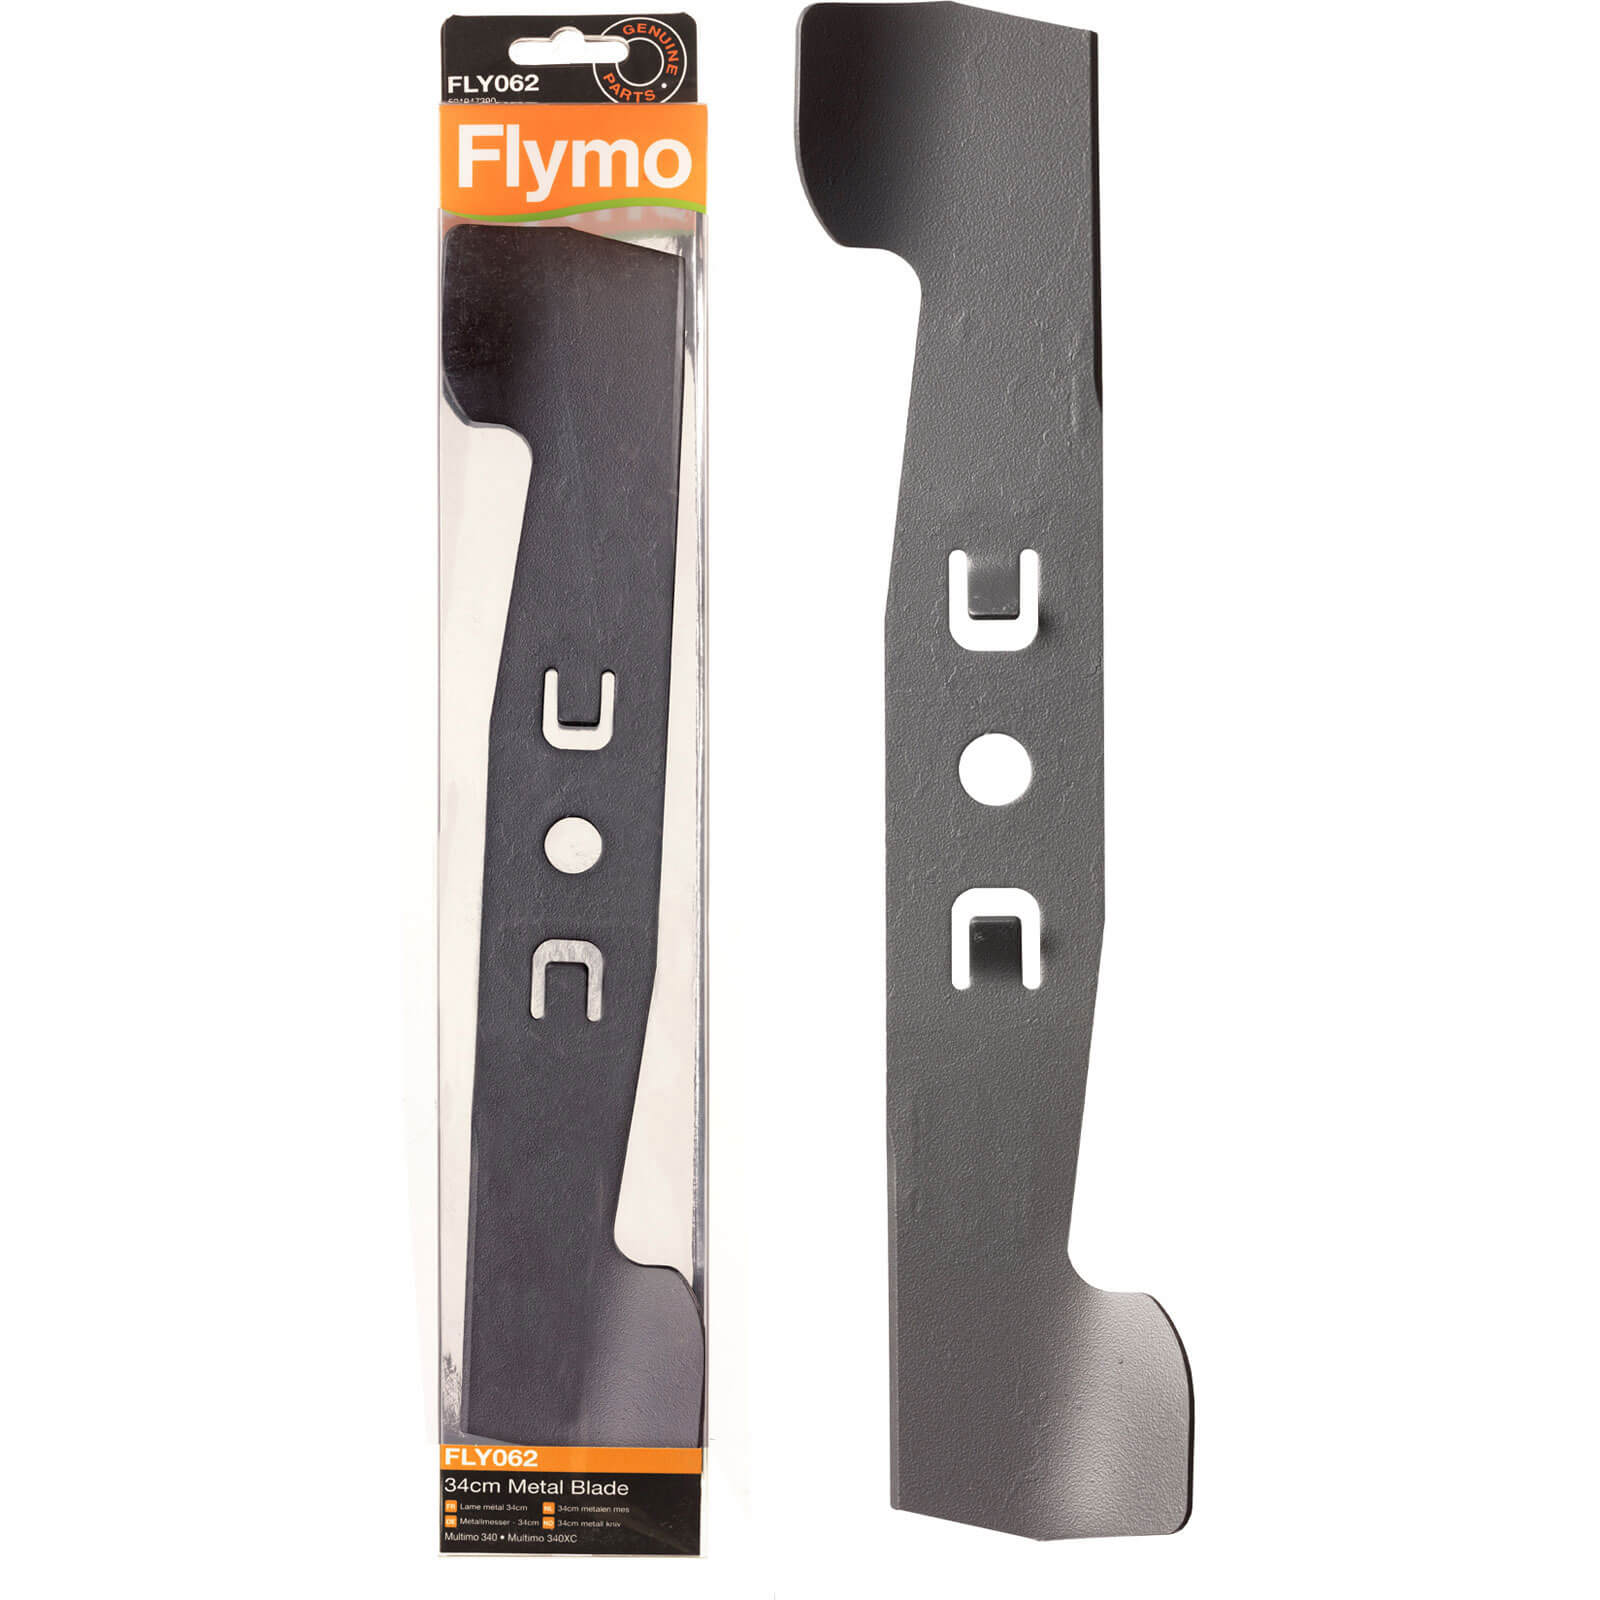 Photo of Flymo Fly062 Genuine Blade For Multimo 340xc Lawnmowers 340mm Pack Of 1